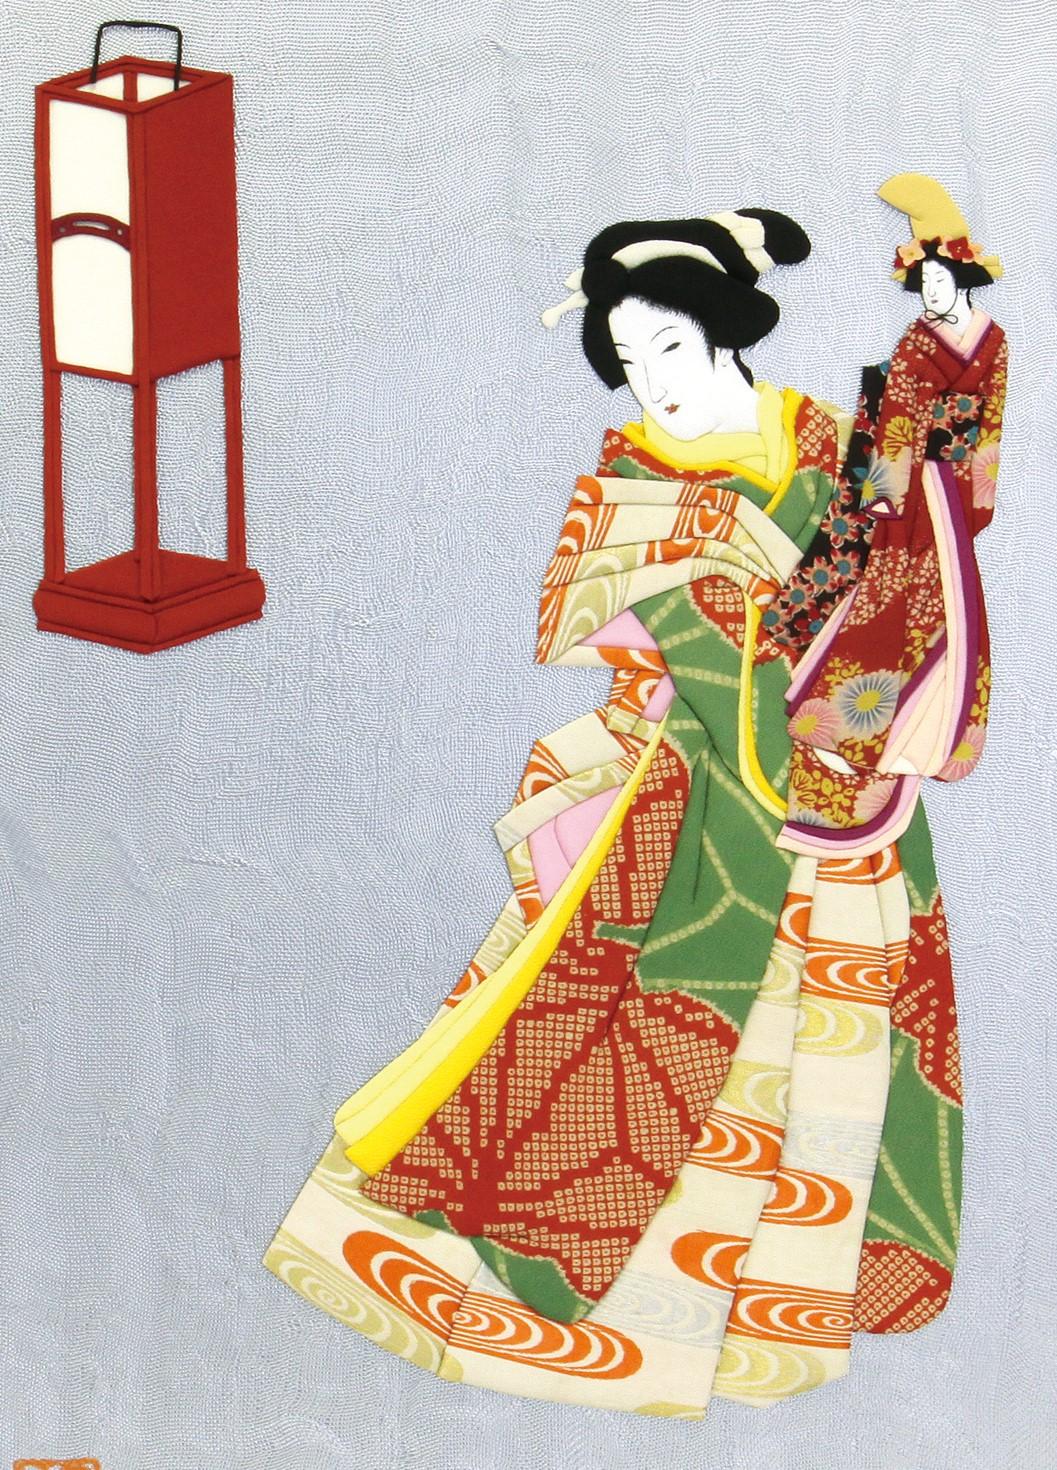 Exquisite Japanese contemporary framed three-dimensional decorative art piece in silk in vivid red and green depicting a performer holding a beautiful Japanese 